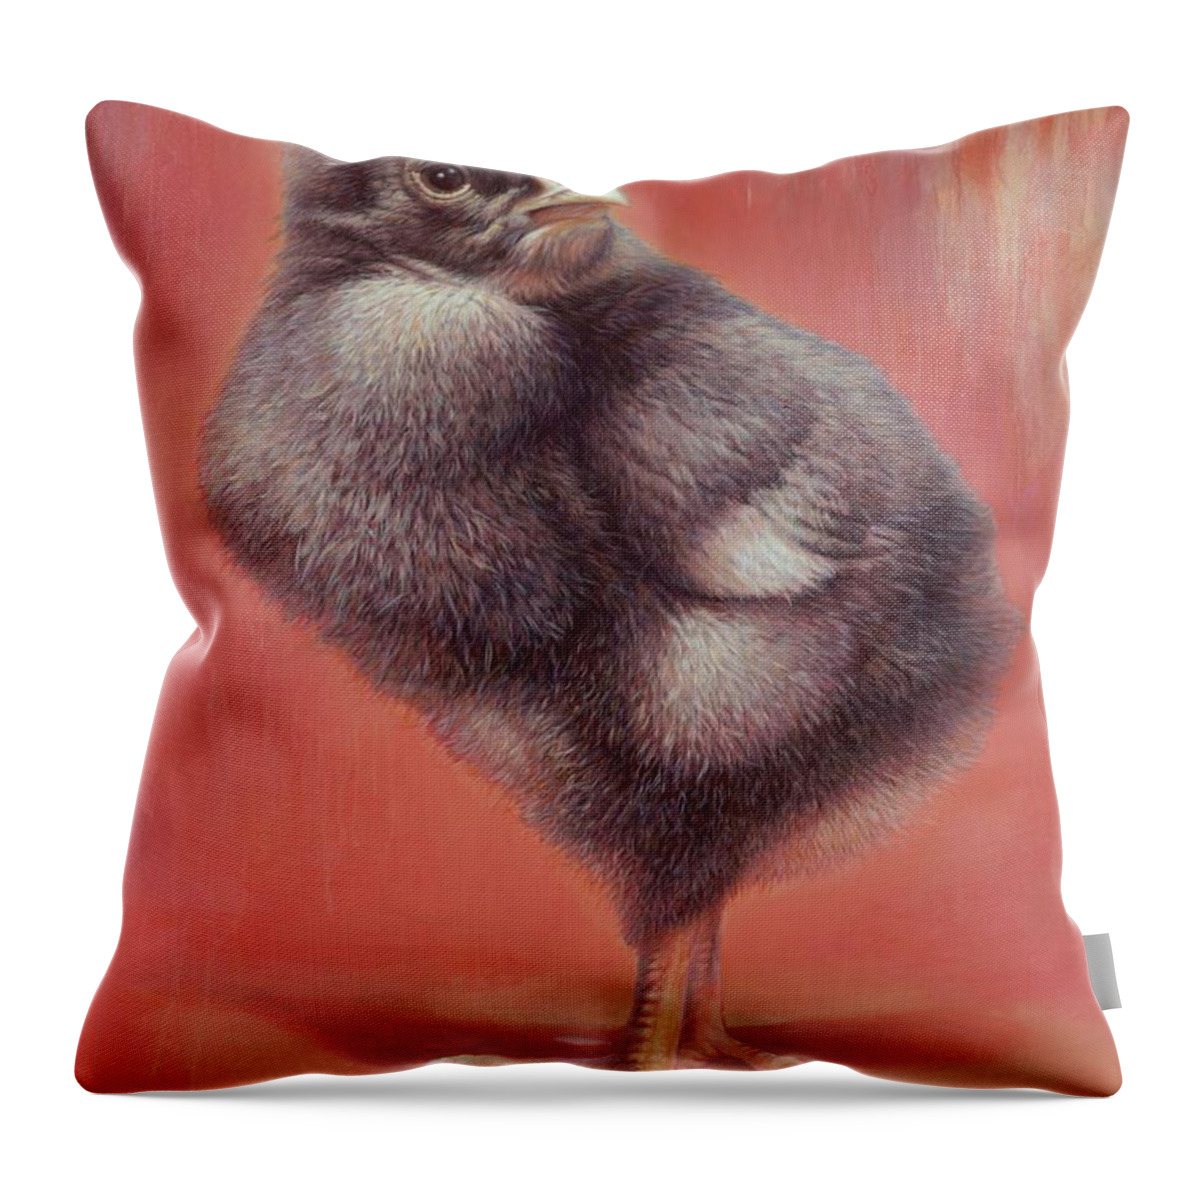 Chick Throw Pillow featuring the painting Baby Chick by Hans Droog